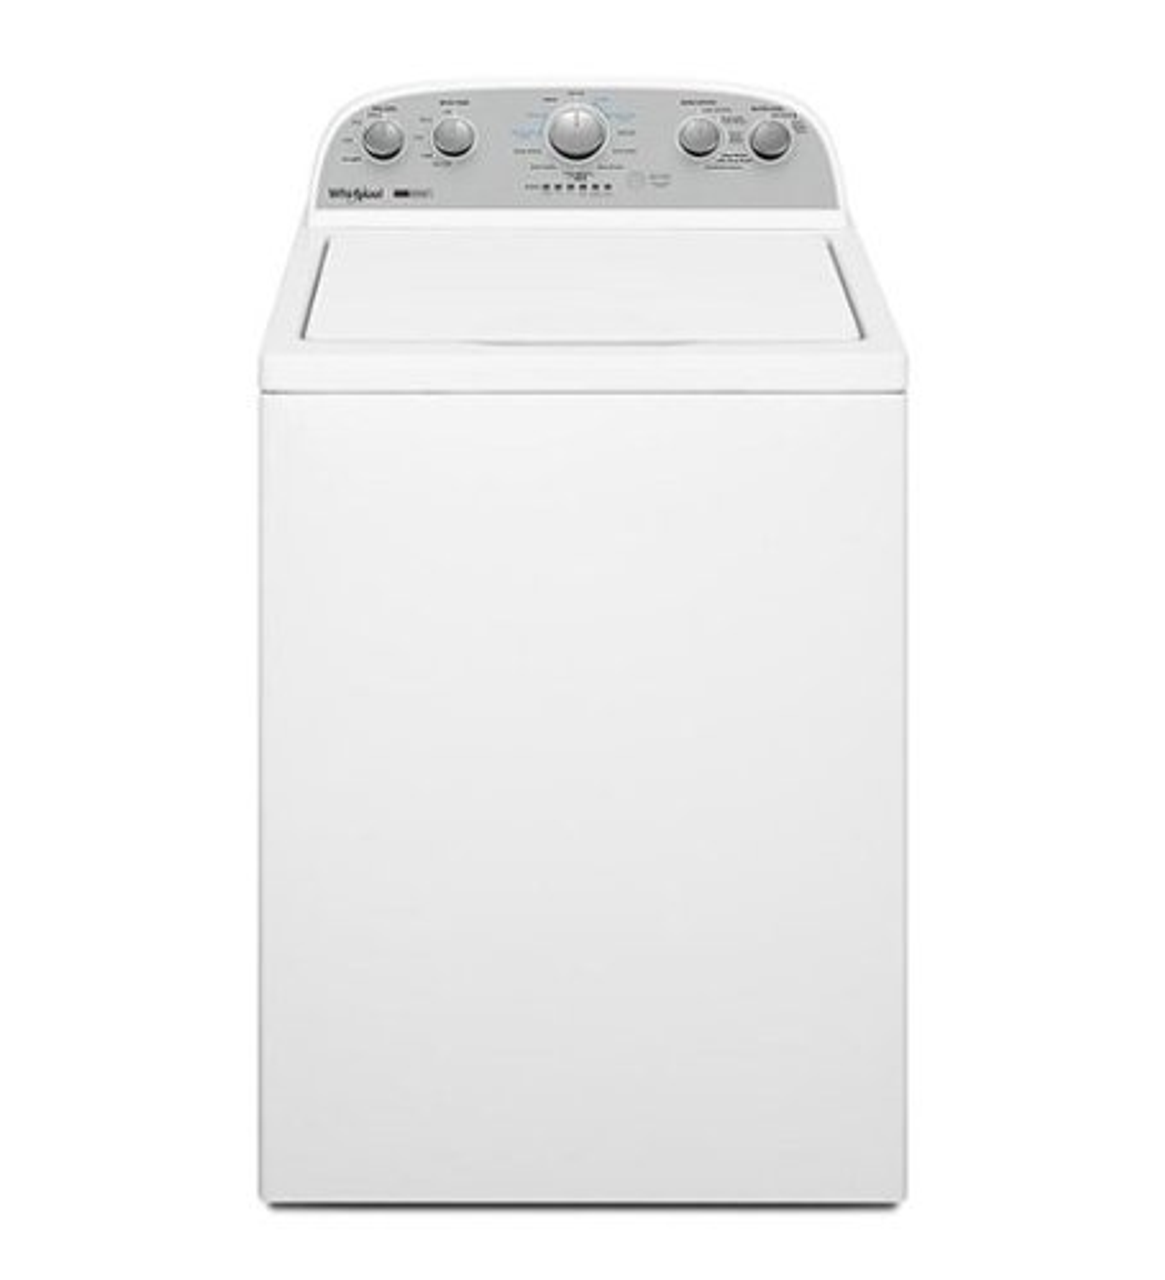 Whirlpool - 3.8 Cu. Ft. High Efficiency Top Load Washer with 2 in 1 Removable Agitator - White